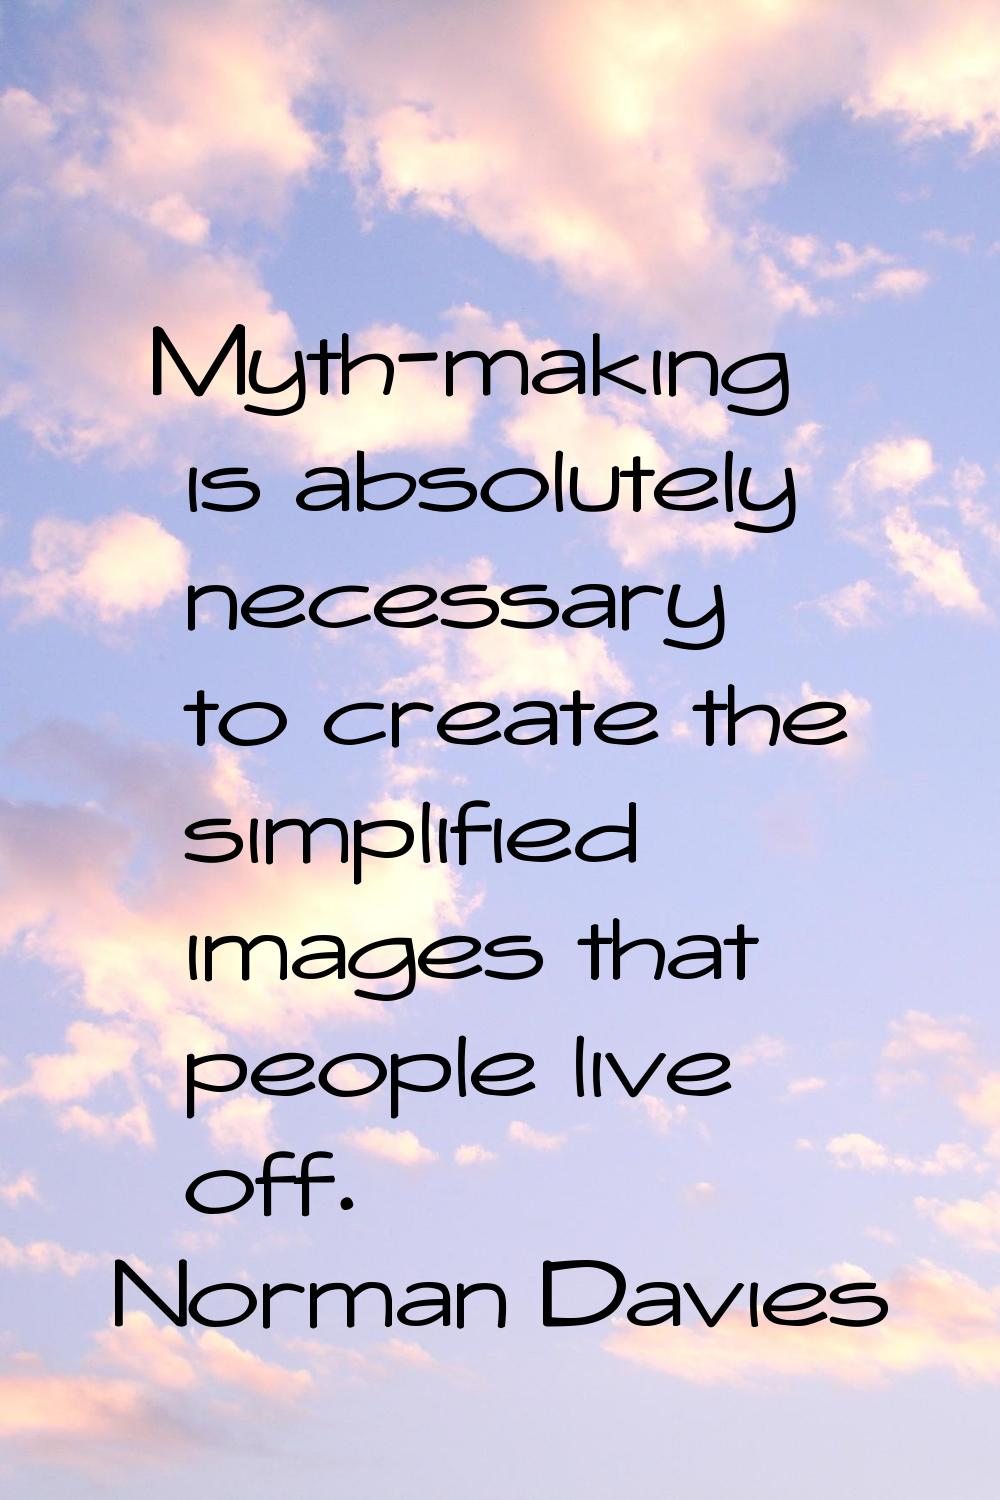 Myth-making is absolutely necessary to create the simplified images that people live off.